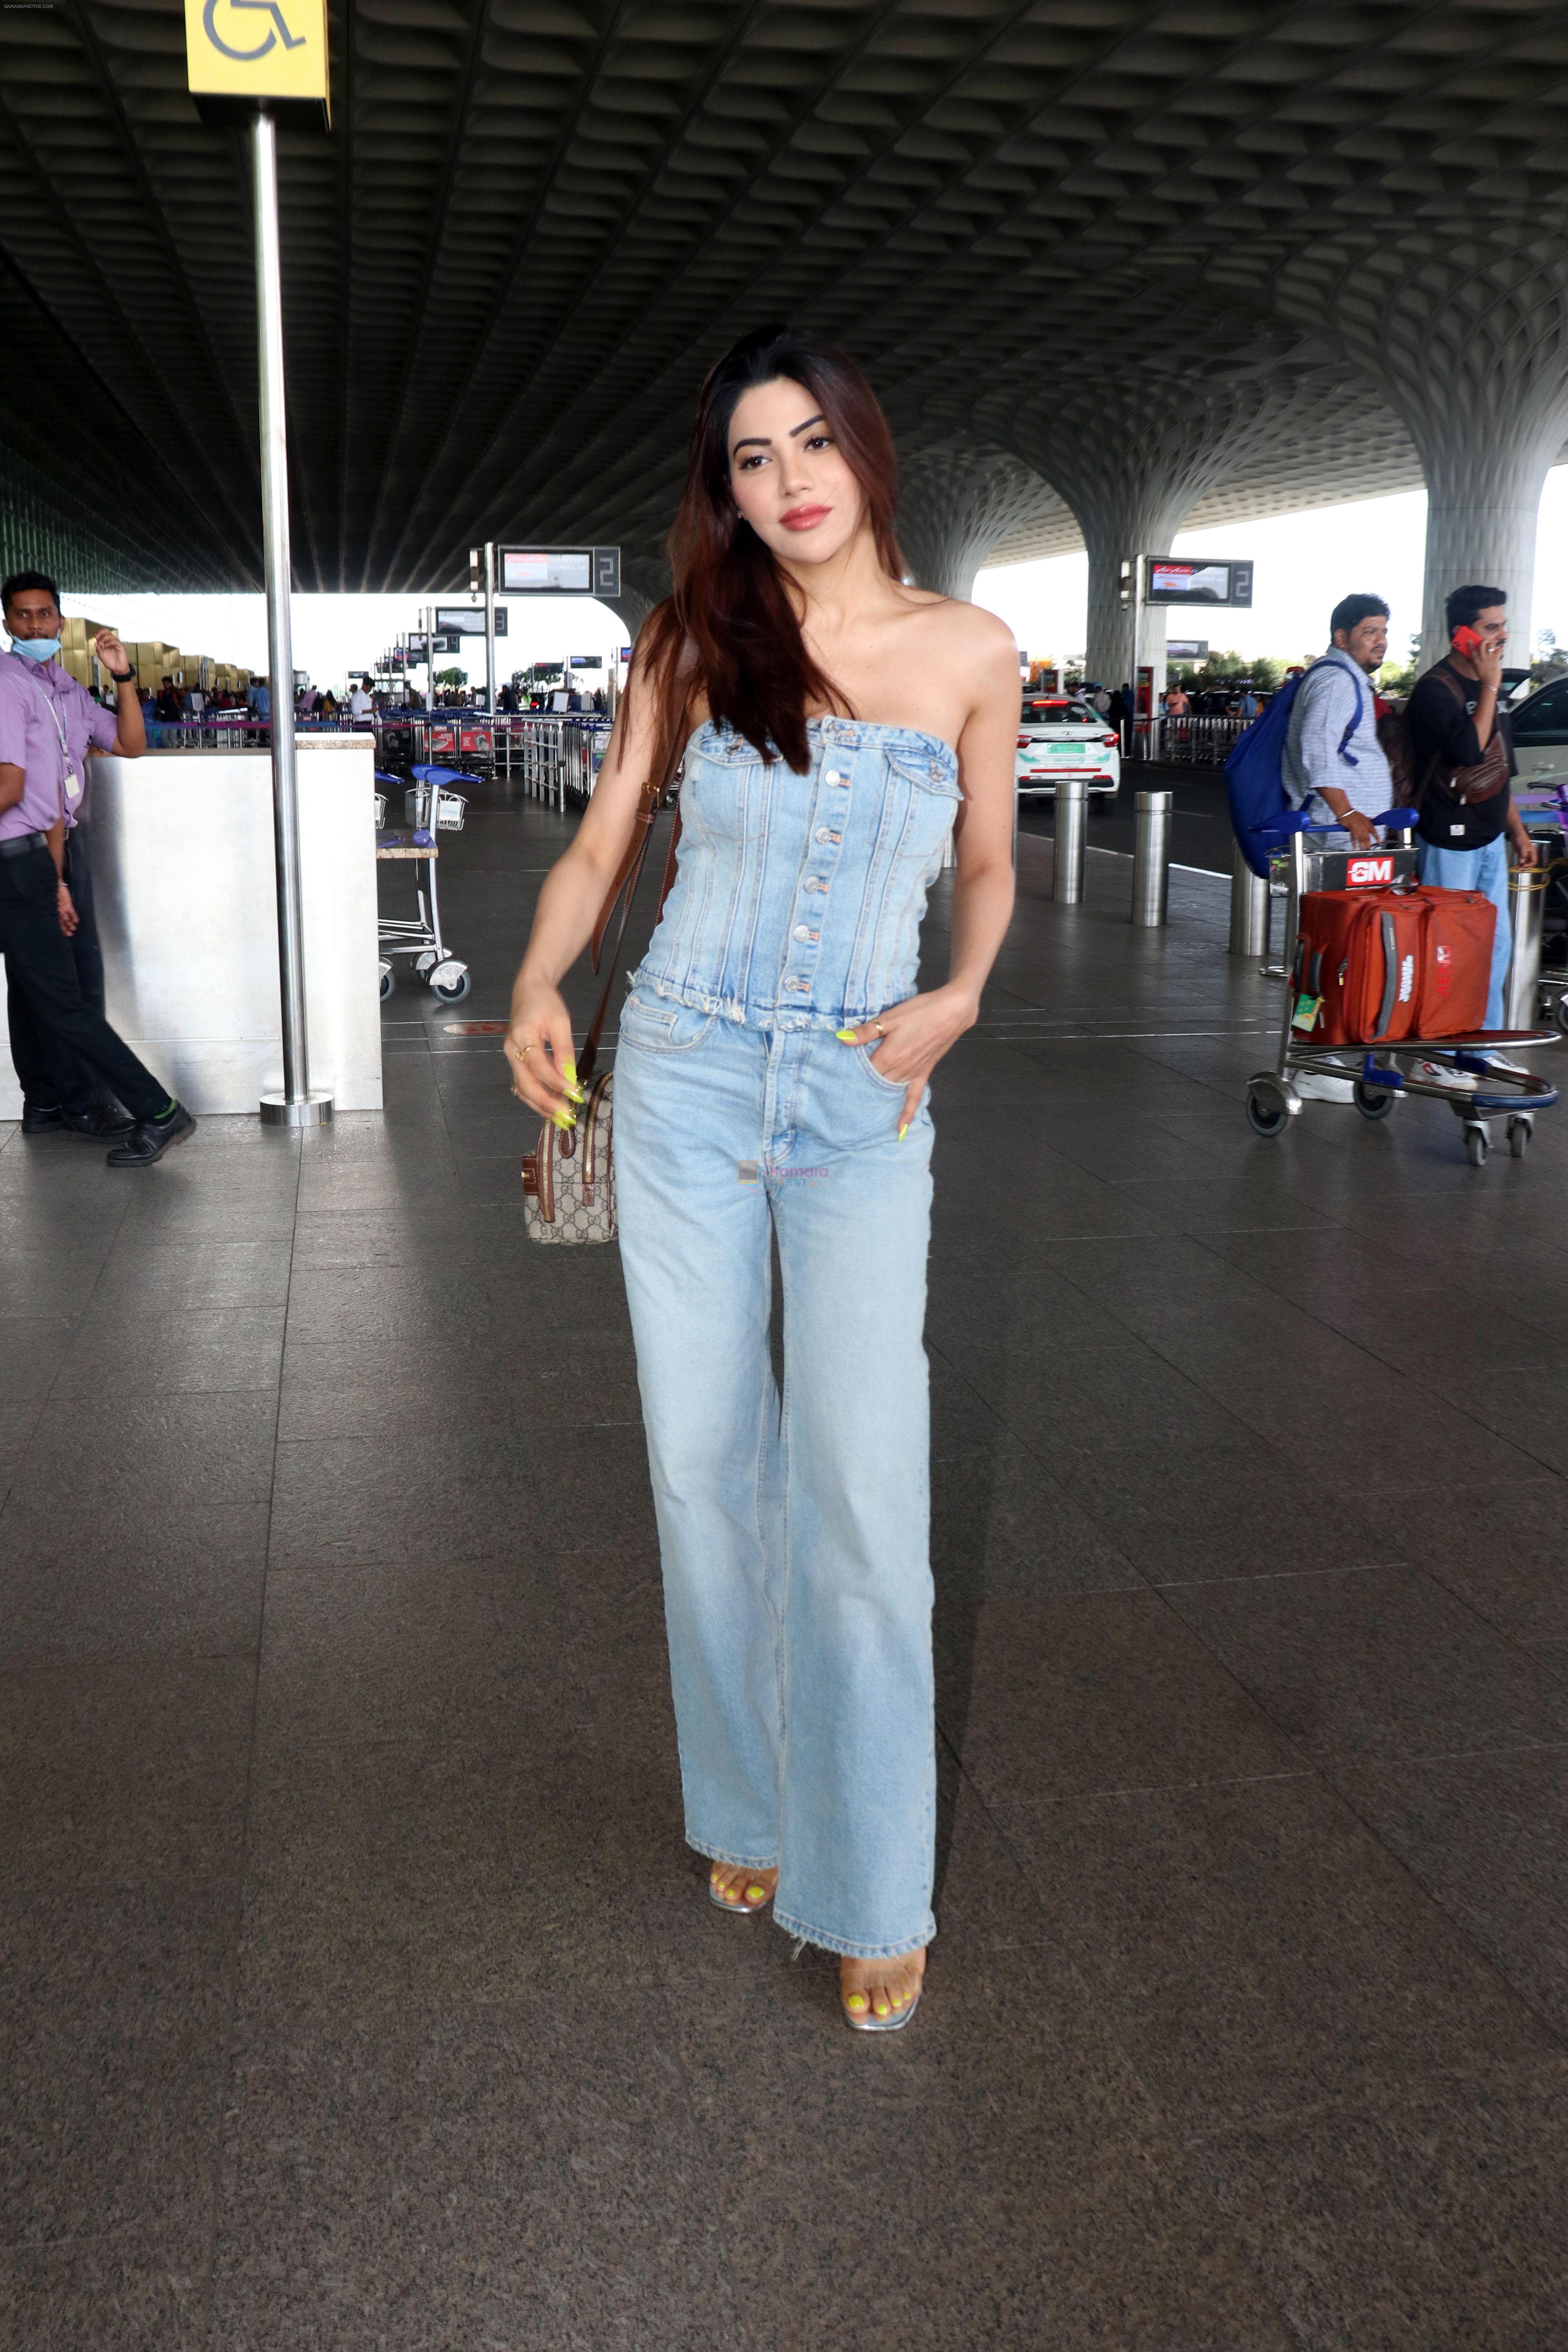 Nikki Tamboli dressed in Jeans top and pant holding Gucci Ophidia Small handbag